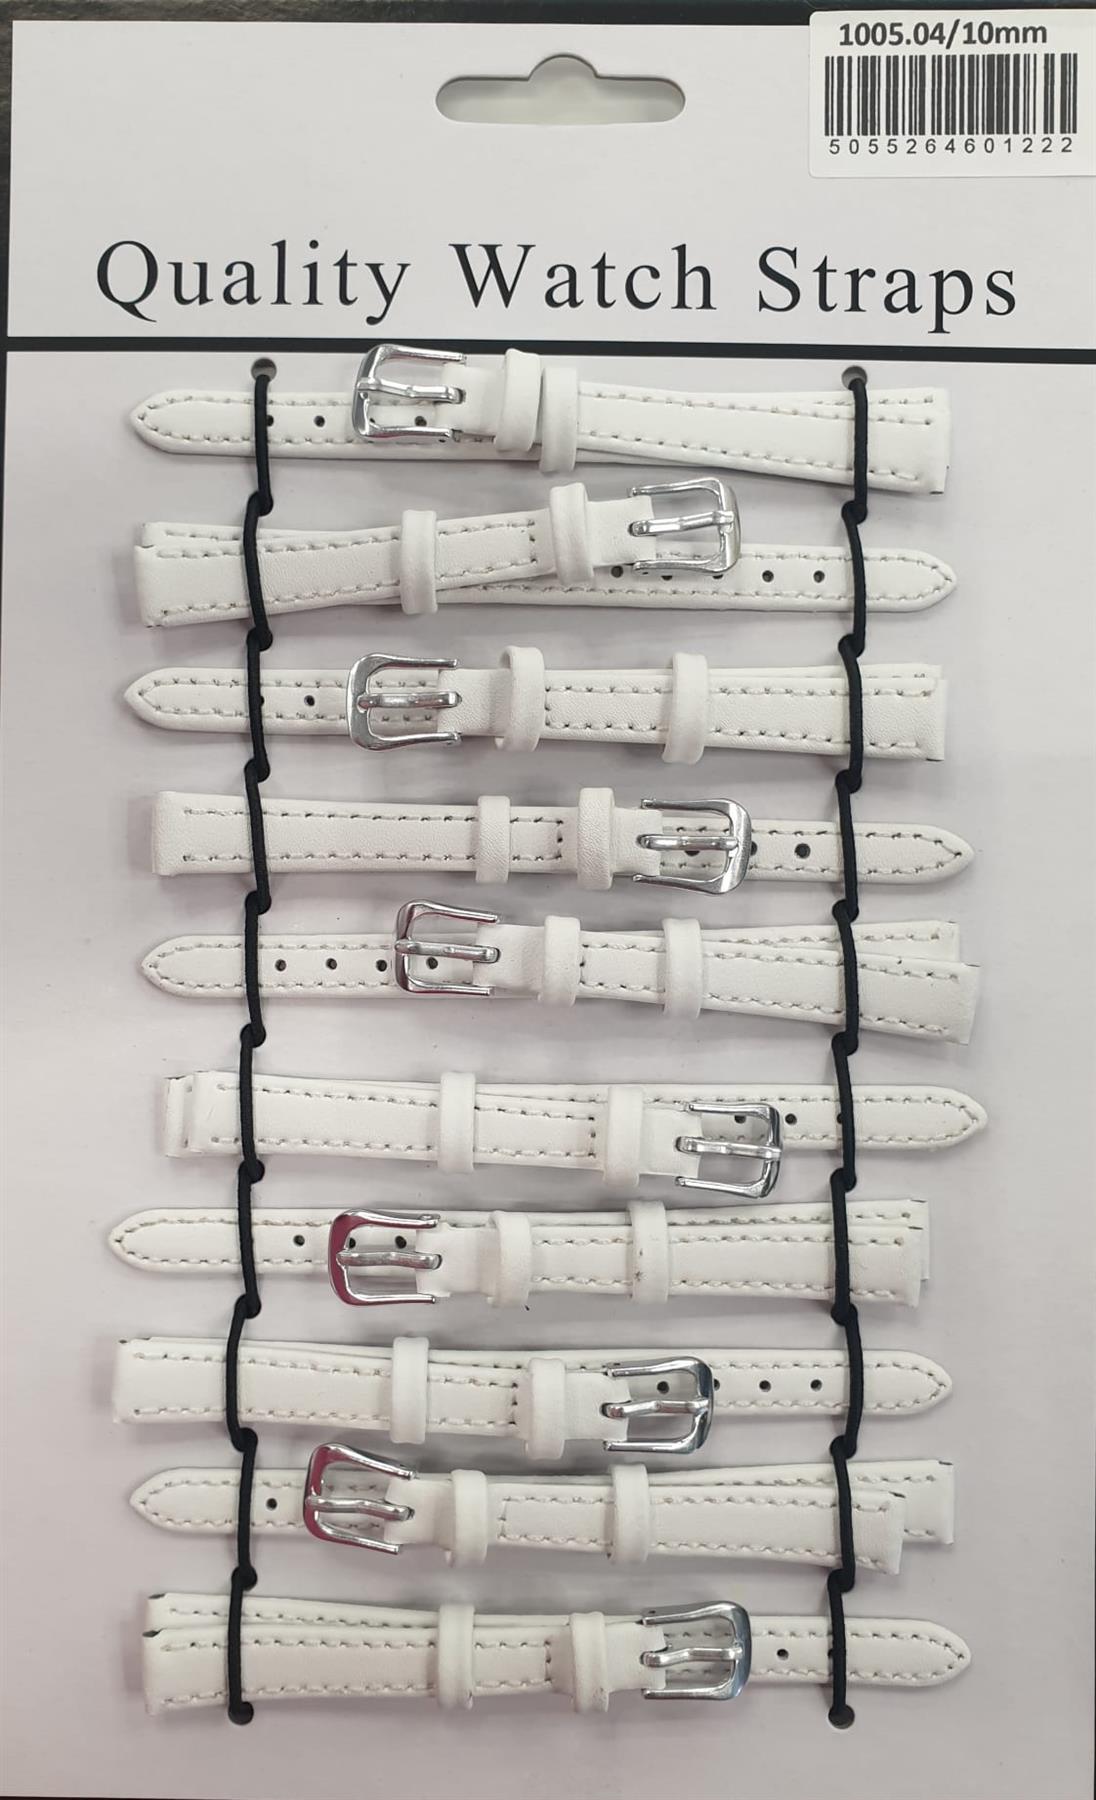 Leather White Watch Straps Pk10 Available sizes from 6mm To 24mm 1005.02